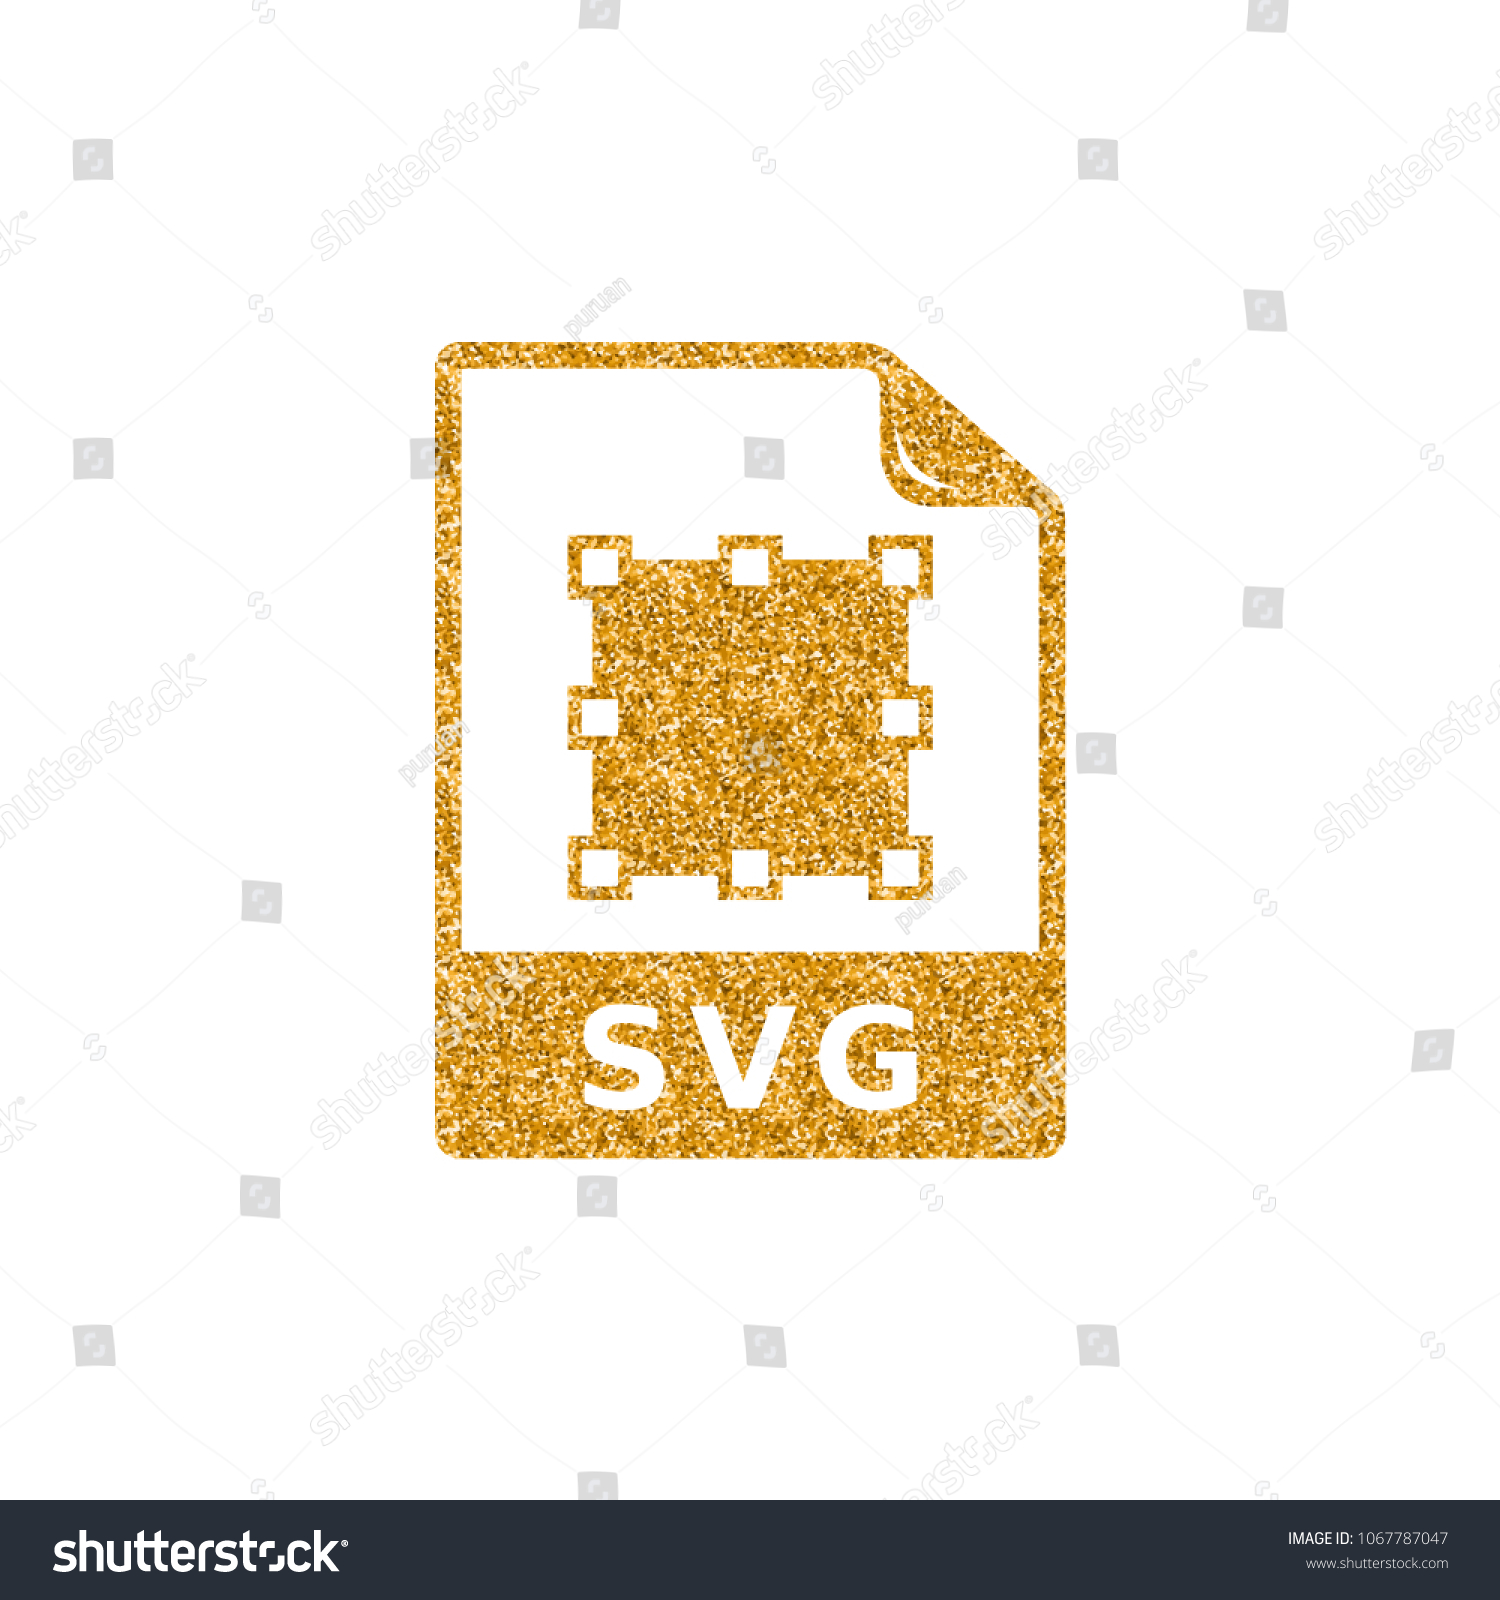 SVG of SVG file icon in gold glitter texture. Sparkle luxury style vector illustration.
 svg